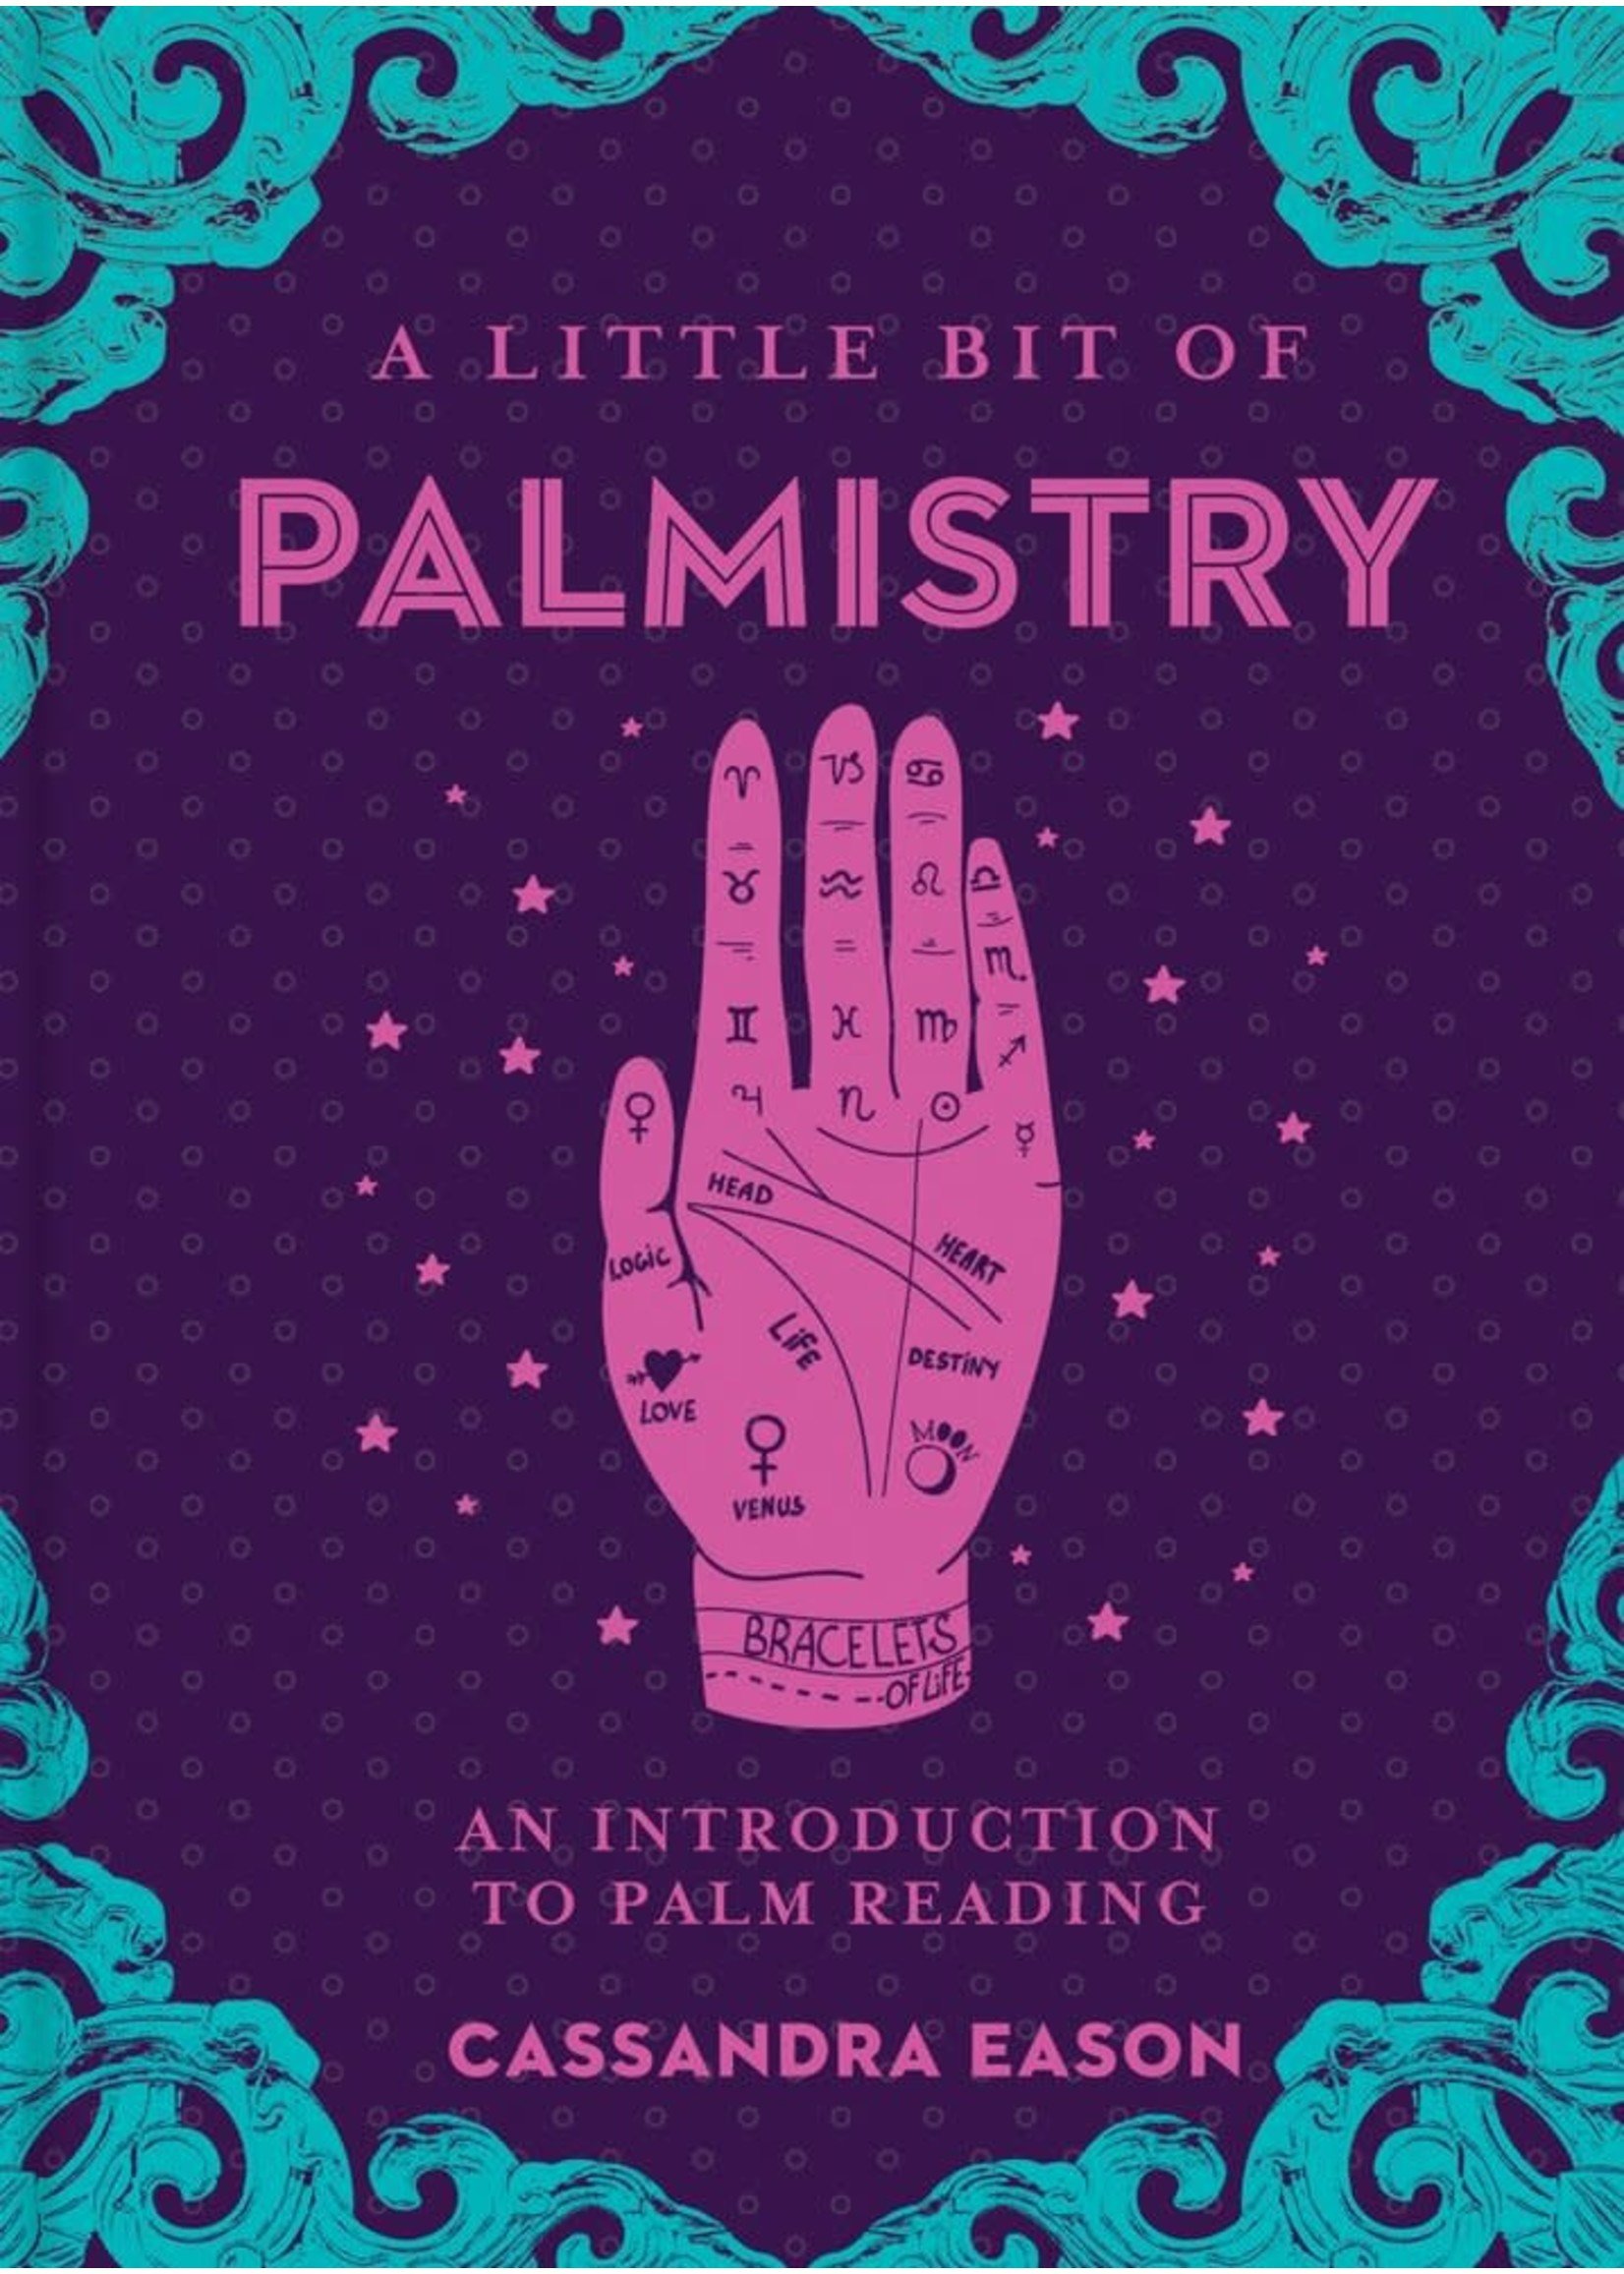 A Little Bit of Palmistry- An Introduction to Palm Reading